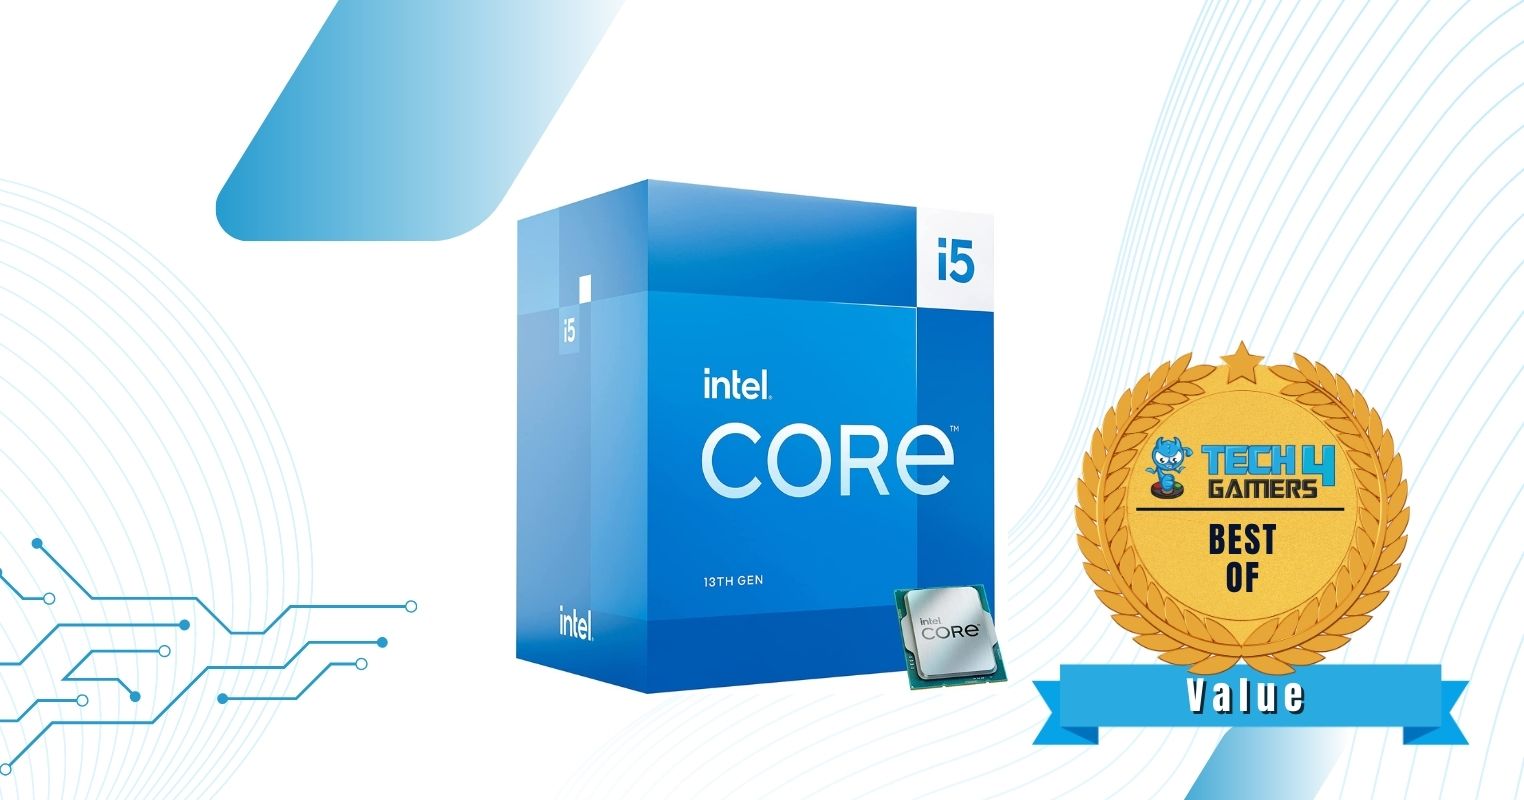 Intel Core i5-13400 - Best Value CPU For Gaming